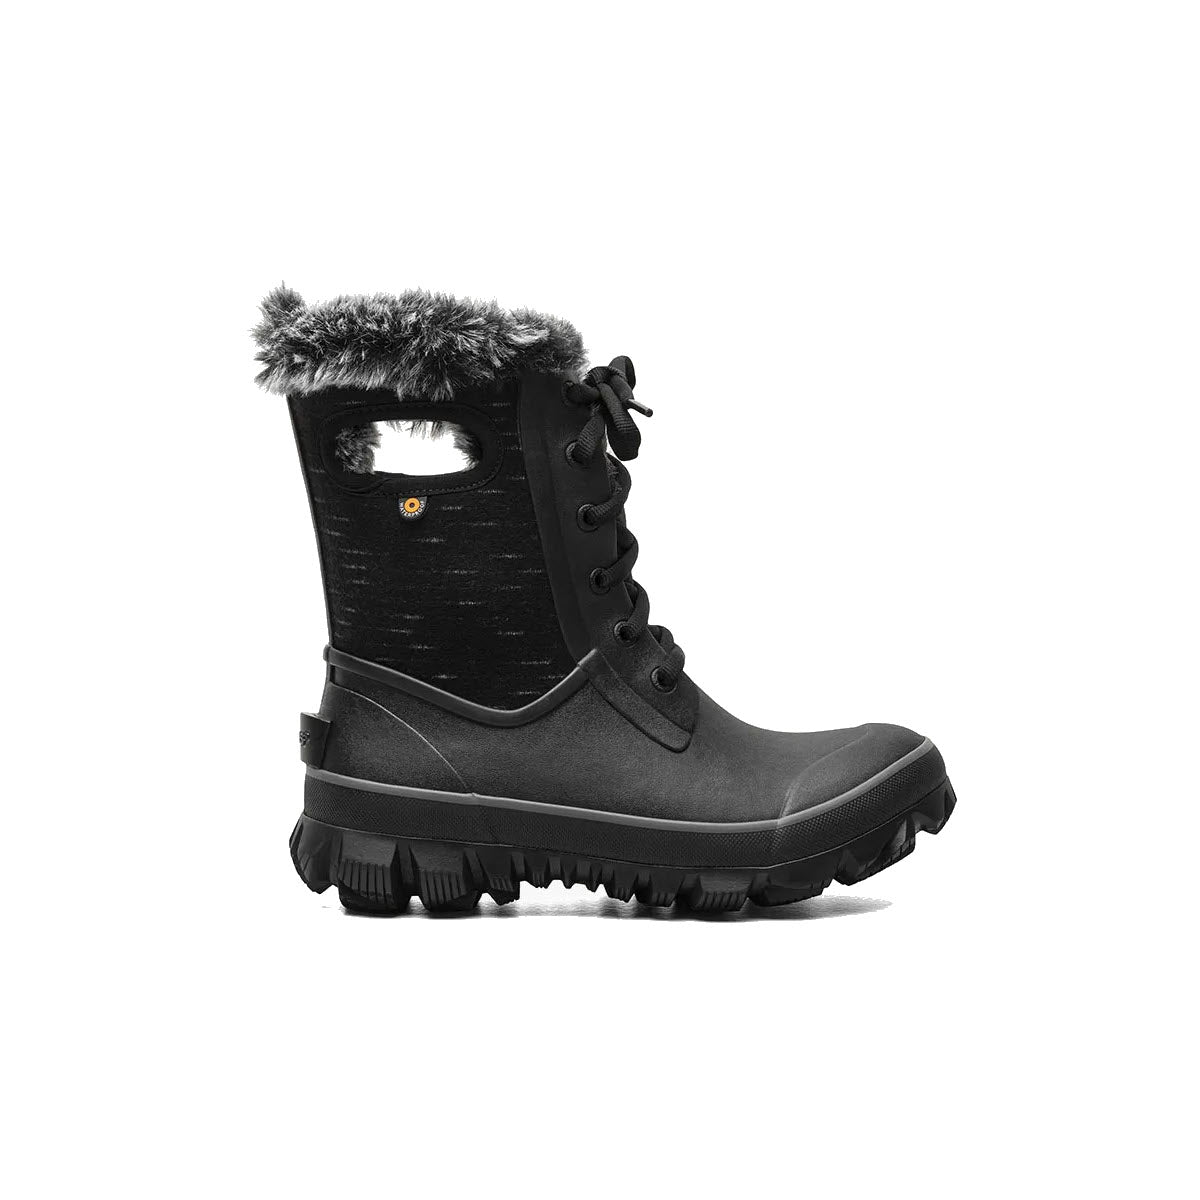 Bogs Arcata Dash Black winter boot with fur lining and Neo-Tech waterproof insulation, isolated on a white background.